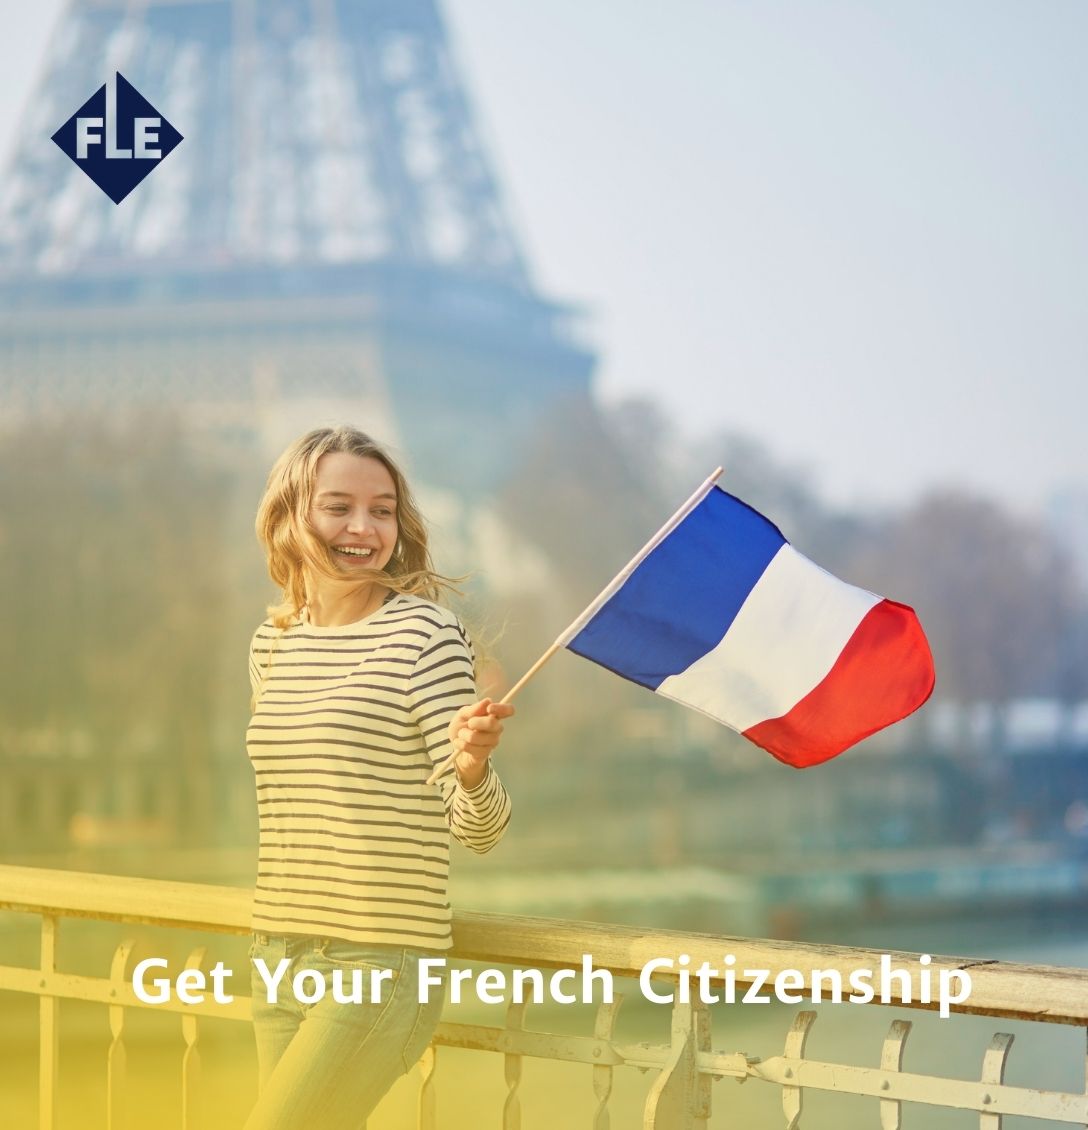 French citizenship